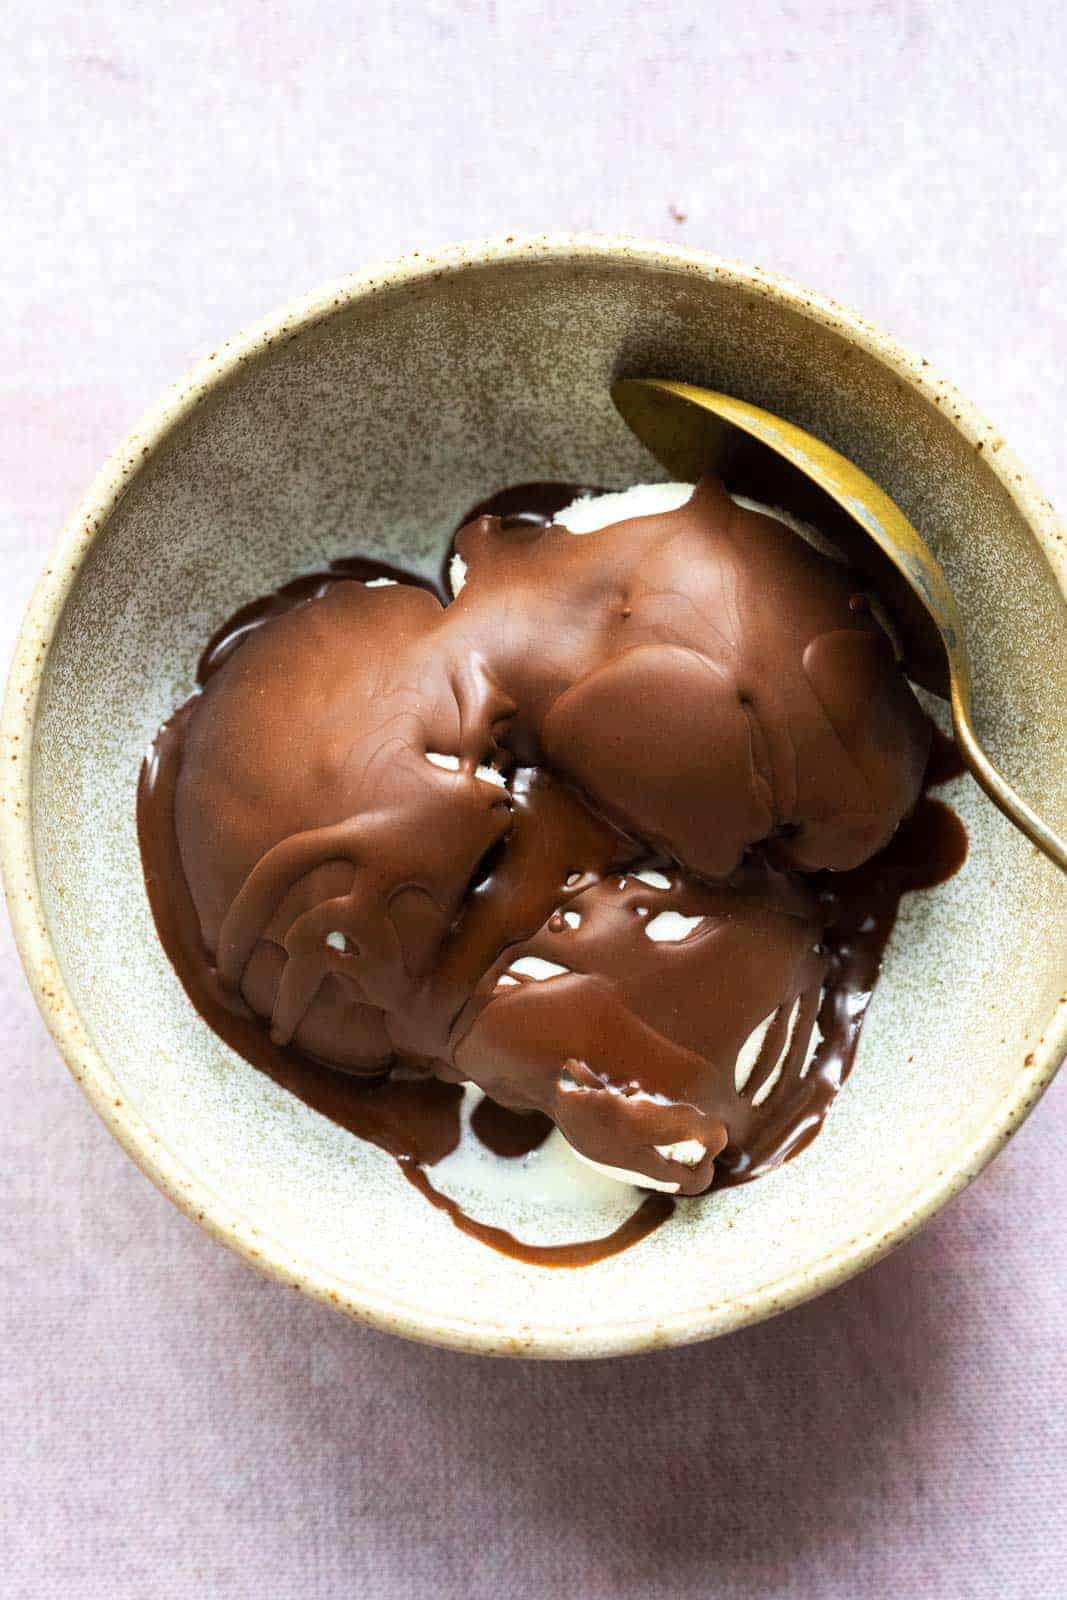 Chocolate magic shell that has hardened over vanilla ice cream to form a crackly crispy shell served in a brown ceramic bowl with a spoon